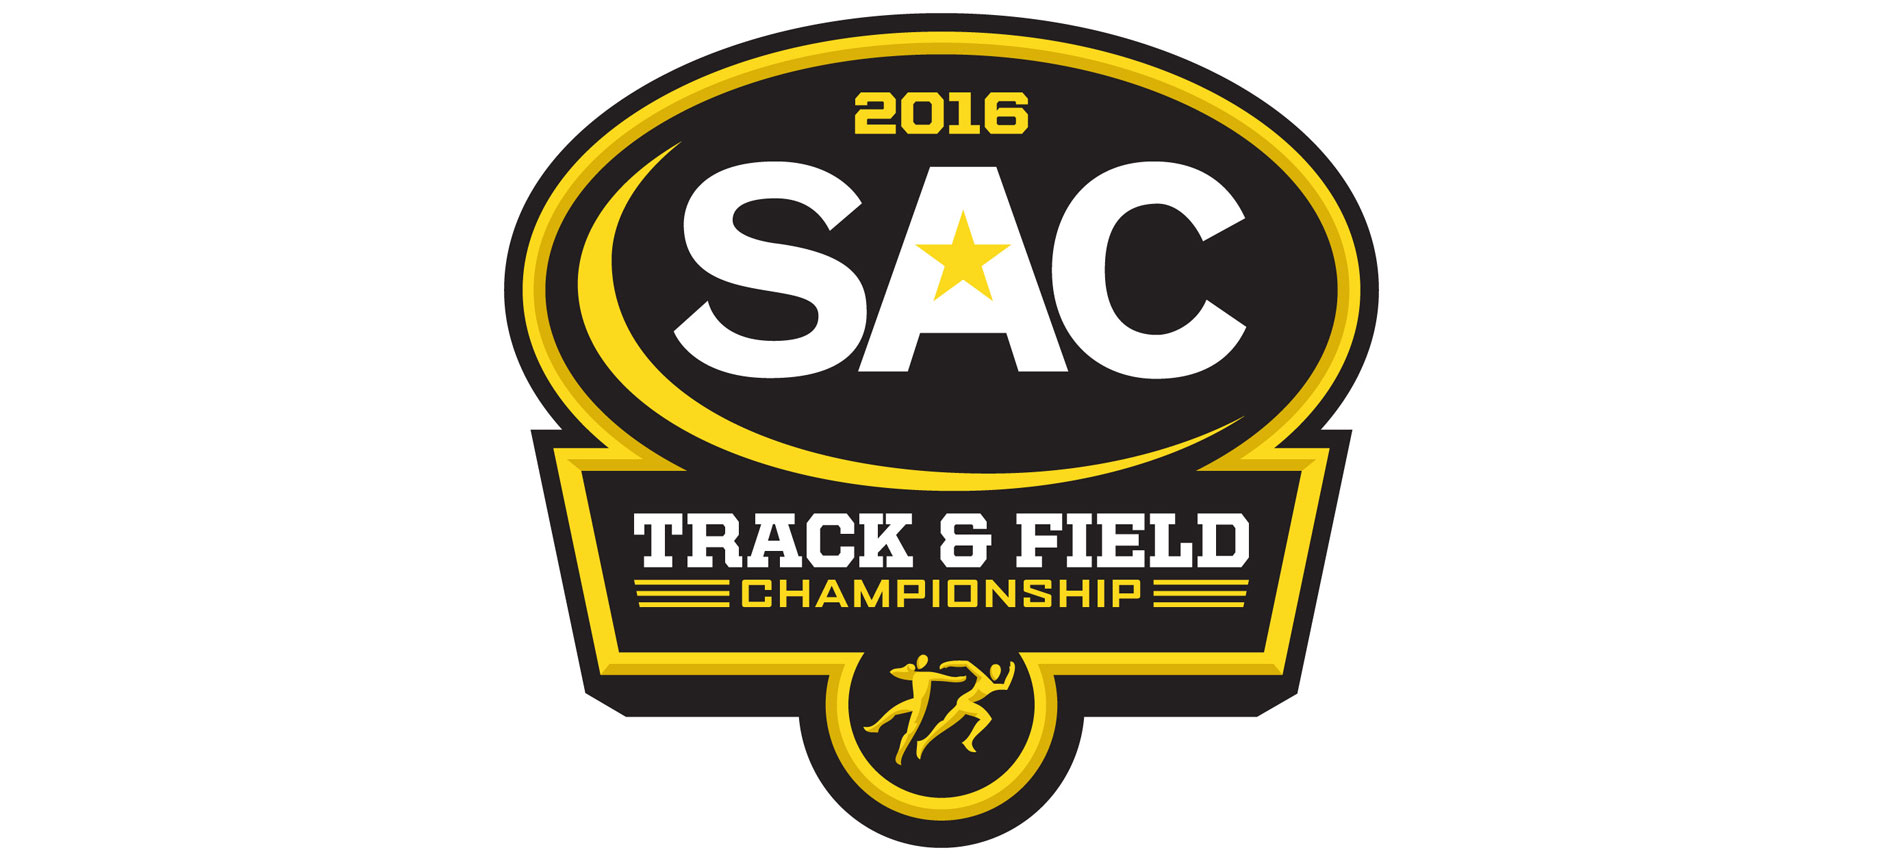 Women Place Fourth, Men Finish Fifth at SAC Track and Field Championships